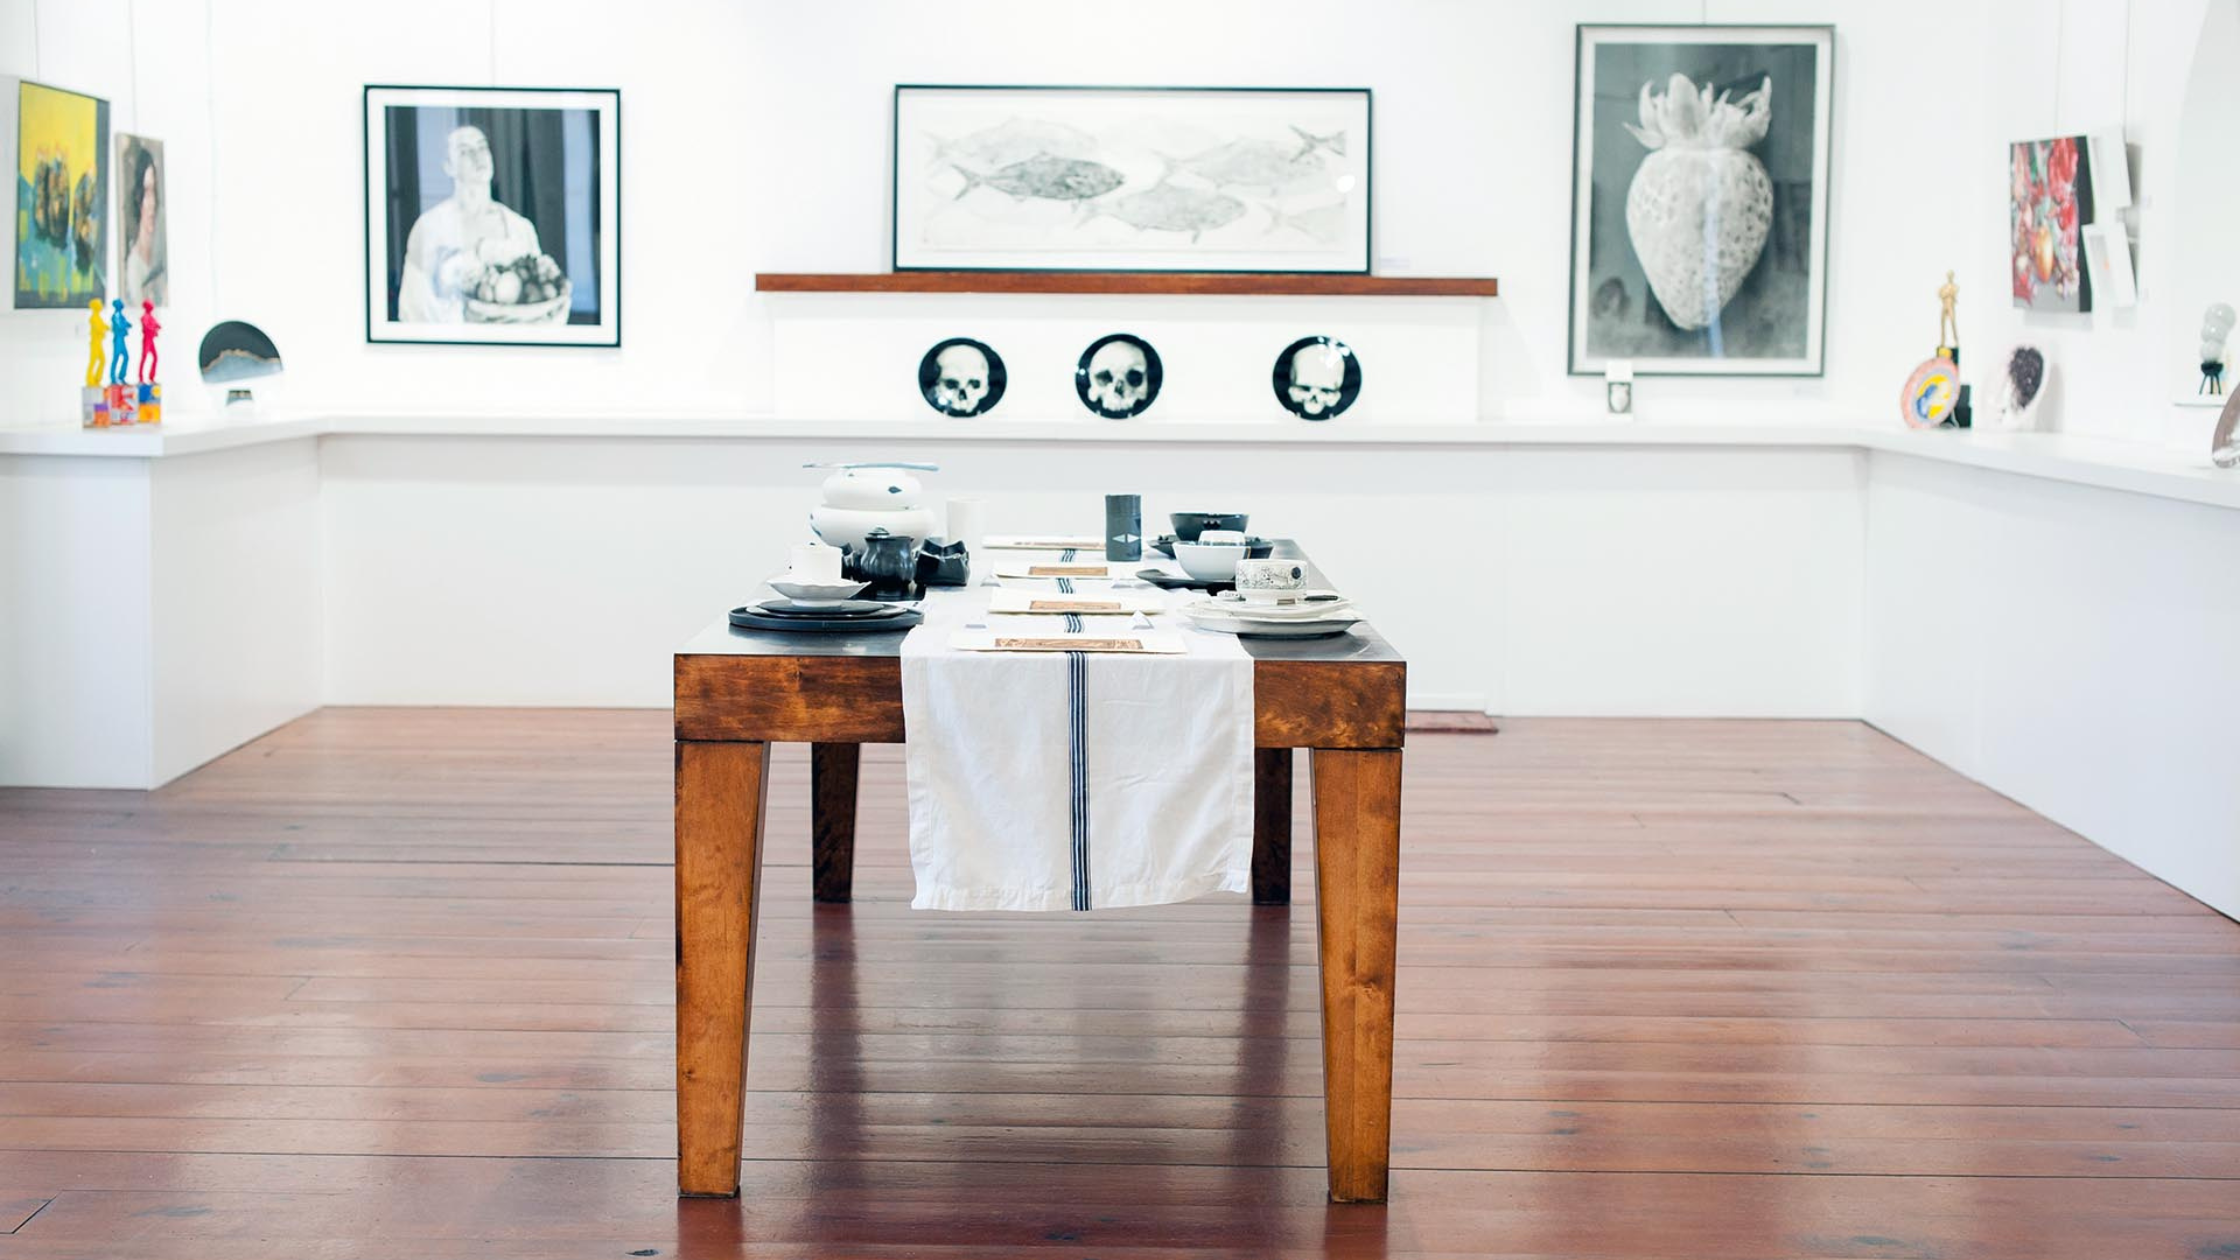 Image of the stunning space and exhibitions at Rust-en-Vrede Gallery in Durbanville